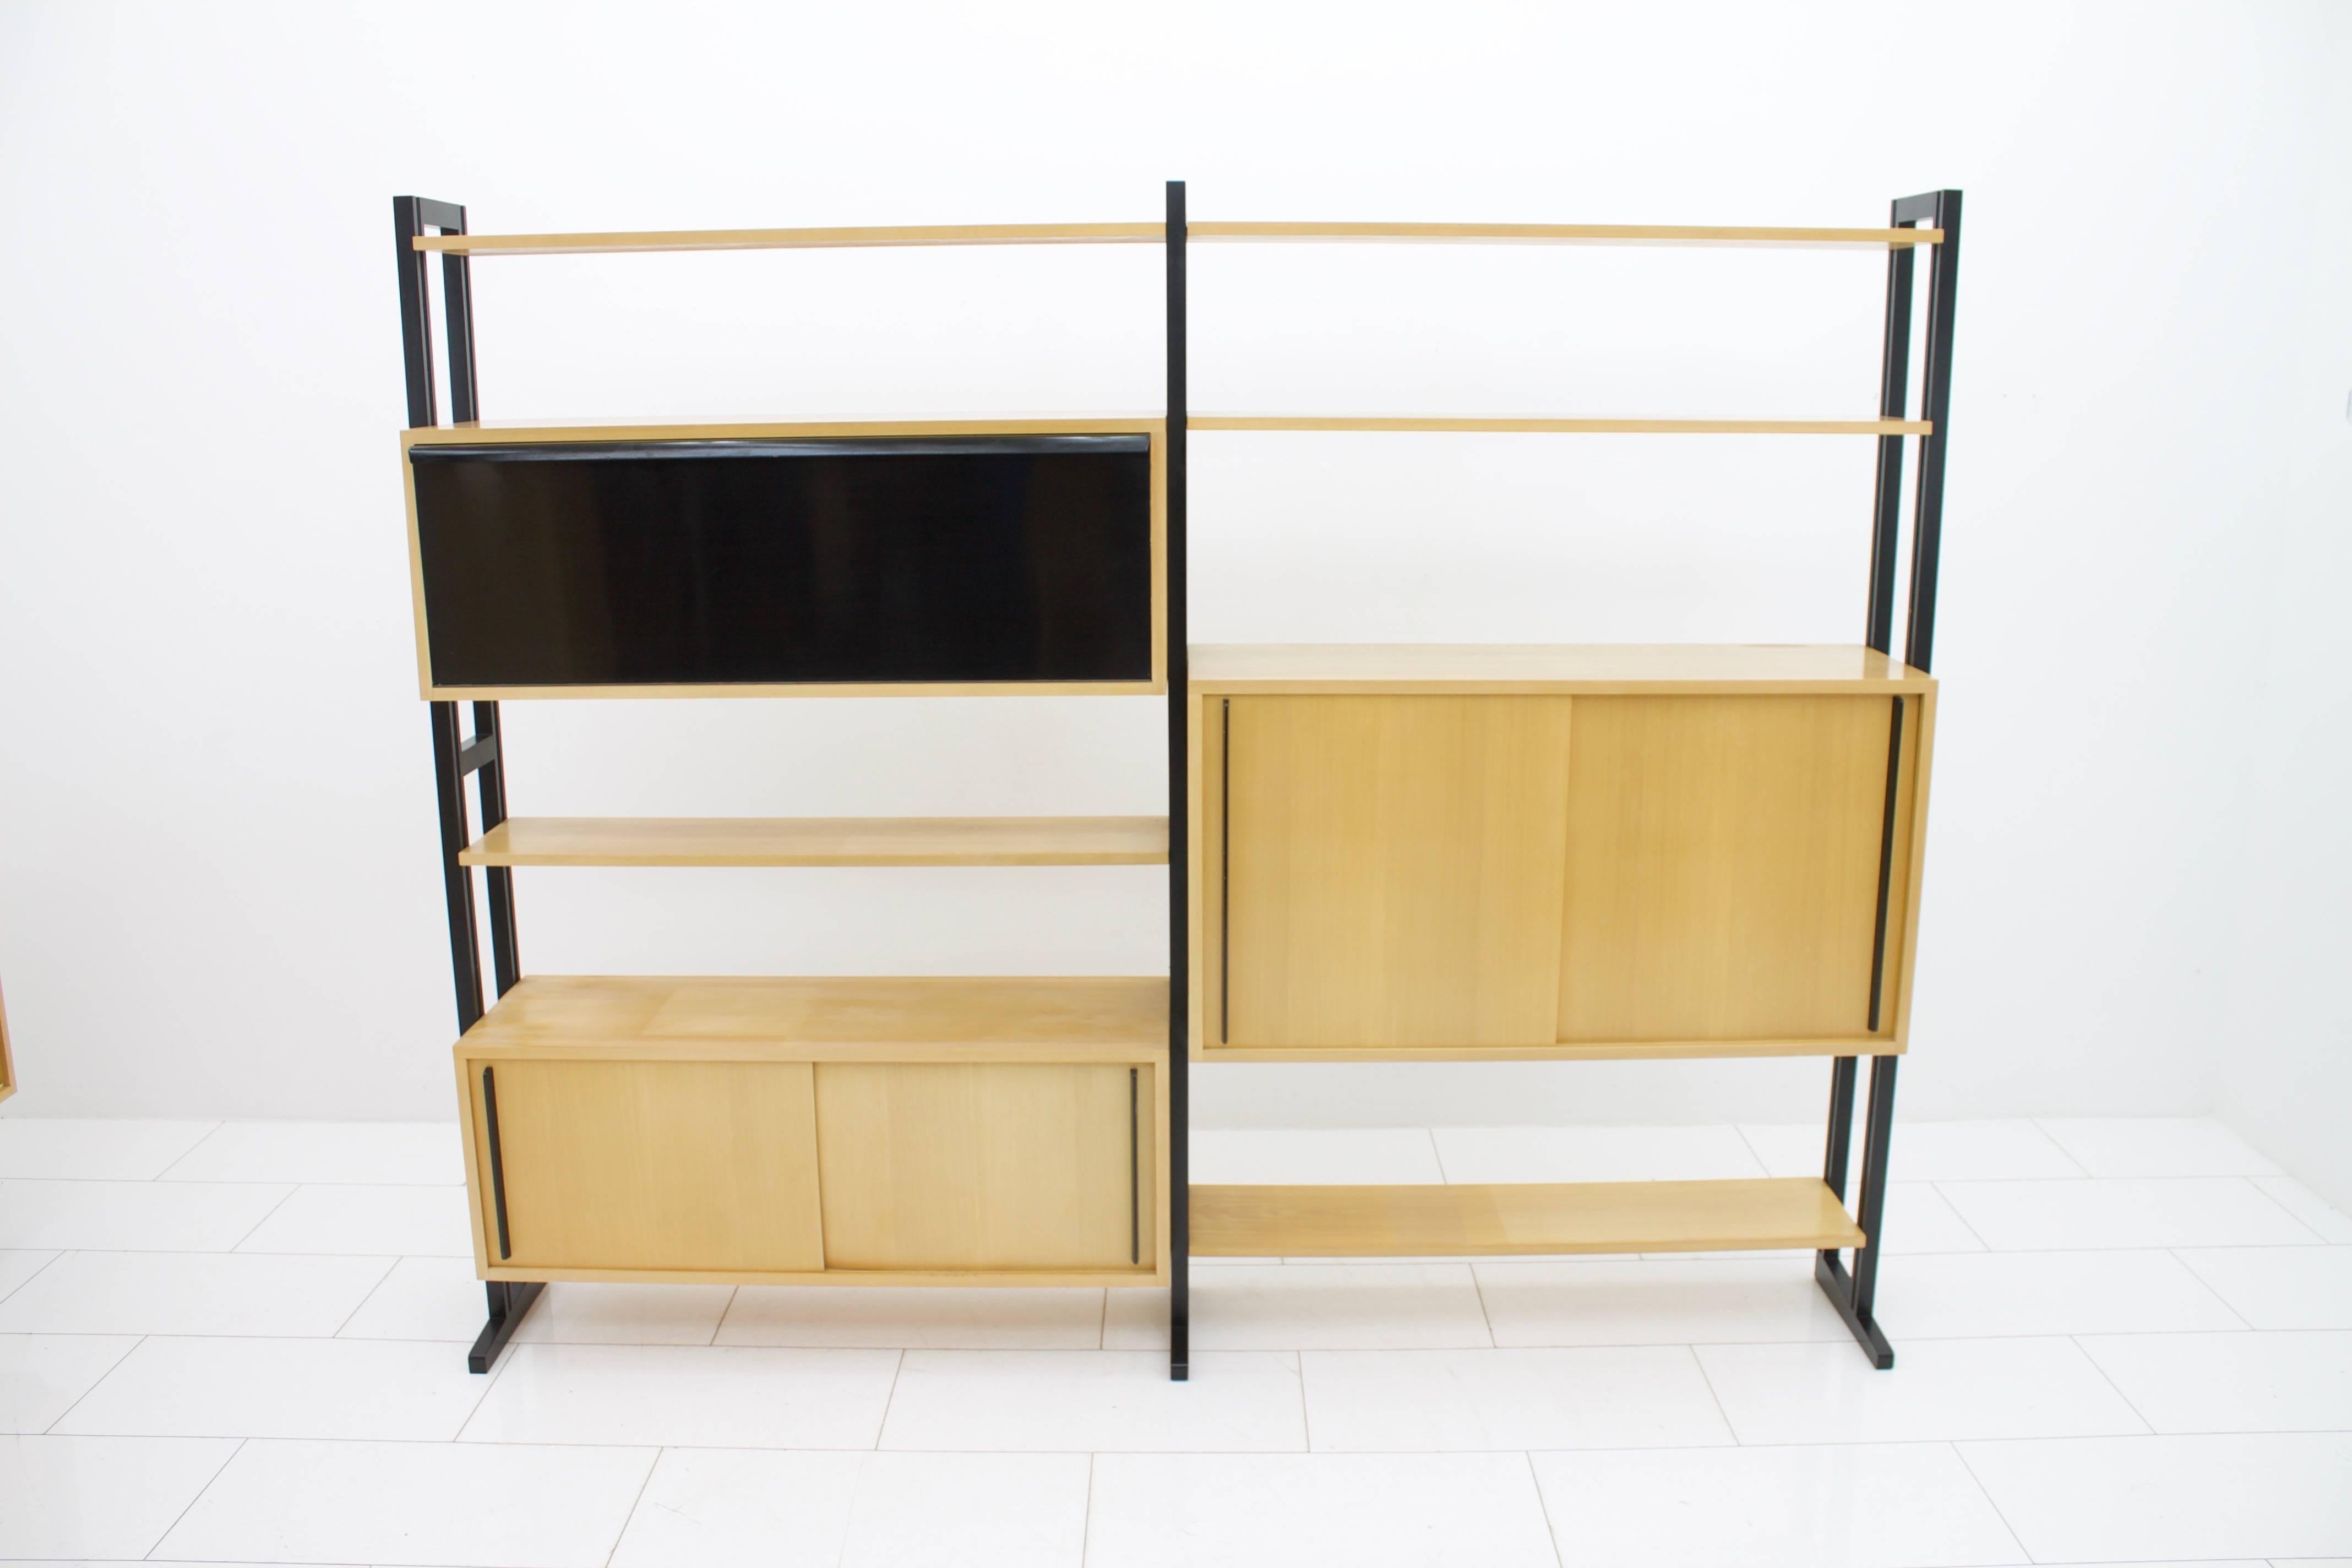 Very rare freestanding shelf system by Alfred Altherr for Freba Switzerland 1955.
cherrywood veneer with black lacquered wood grabs and holder. This shelf can be used as a room divide. The small cabinet has sliding doors on both sides.
Measure: W